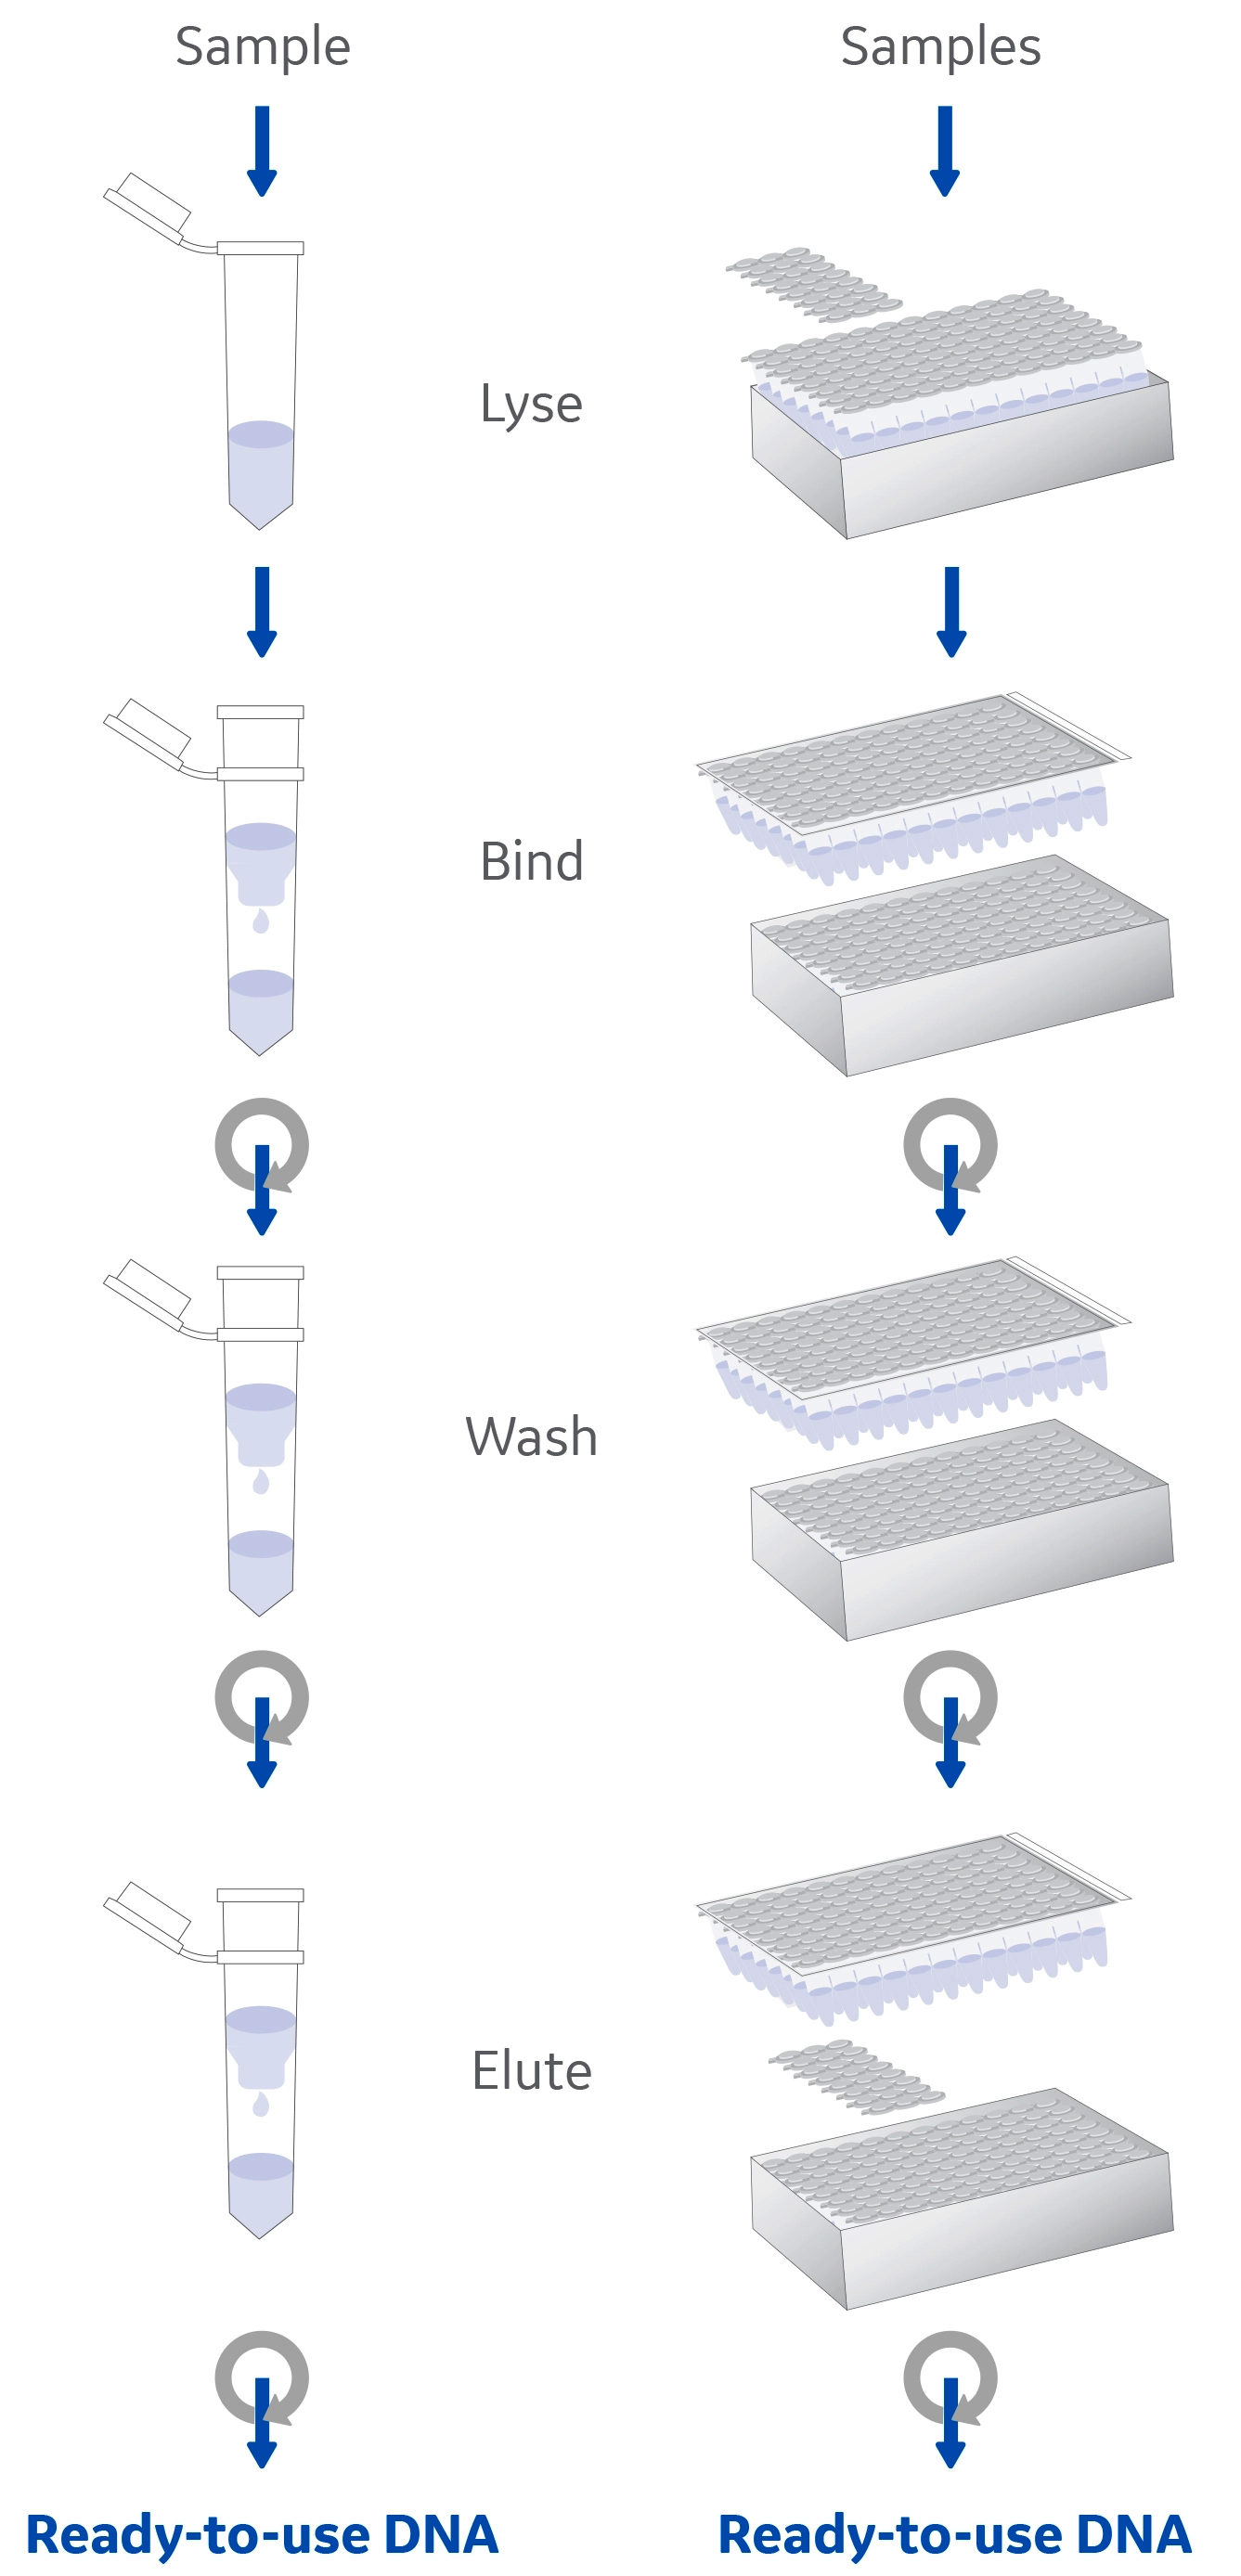 Classical nucleic acid extraction method using glass fiber filters